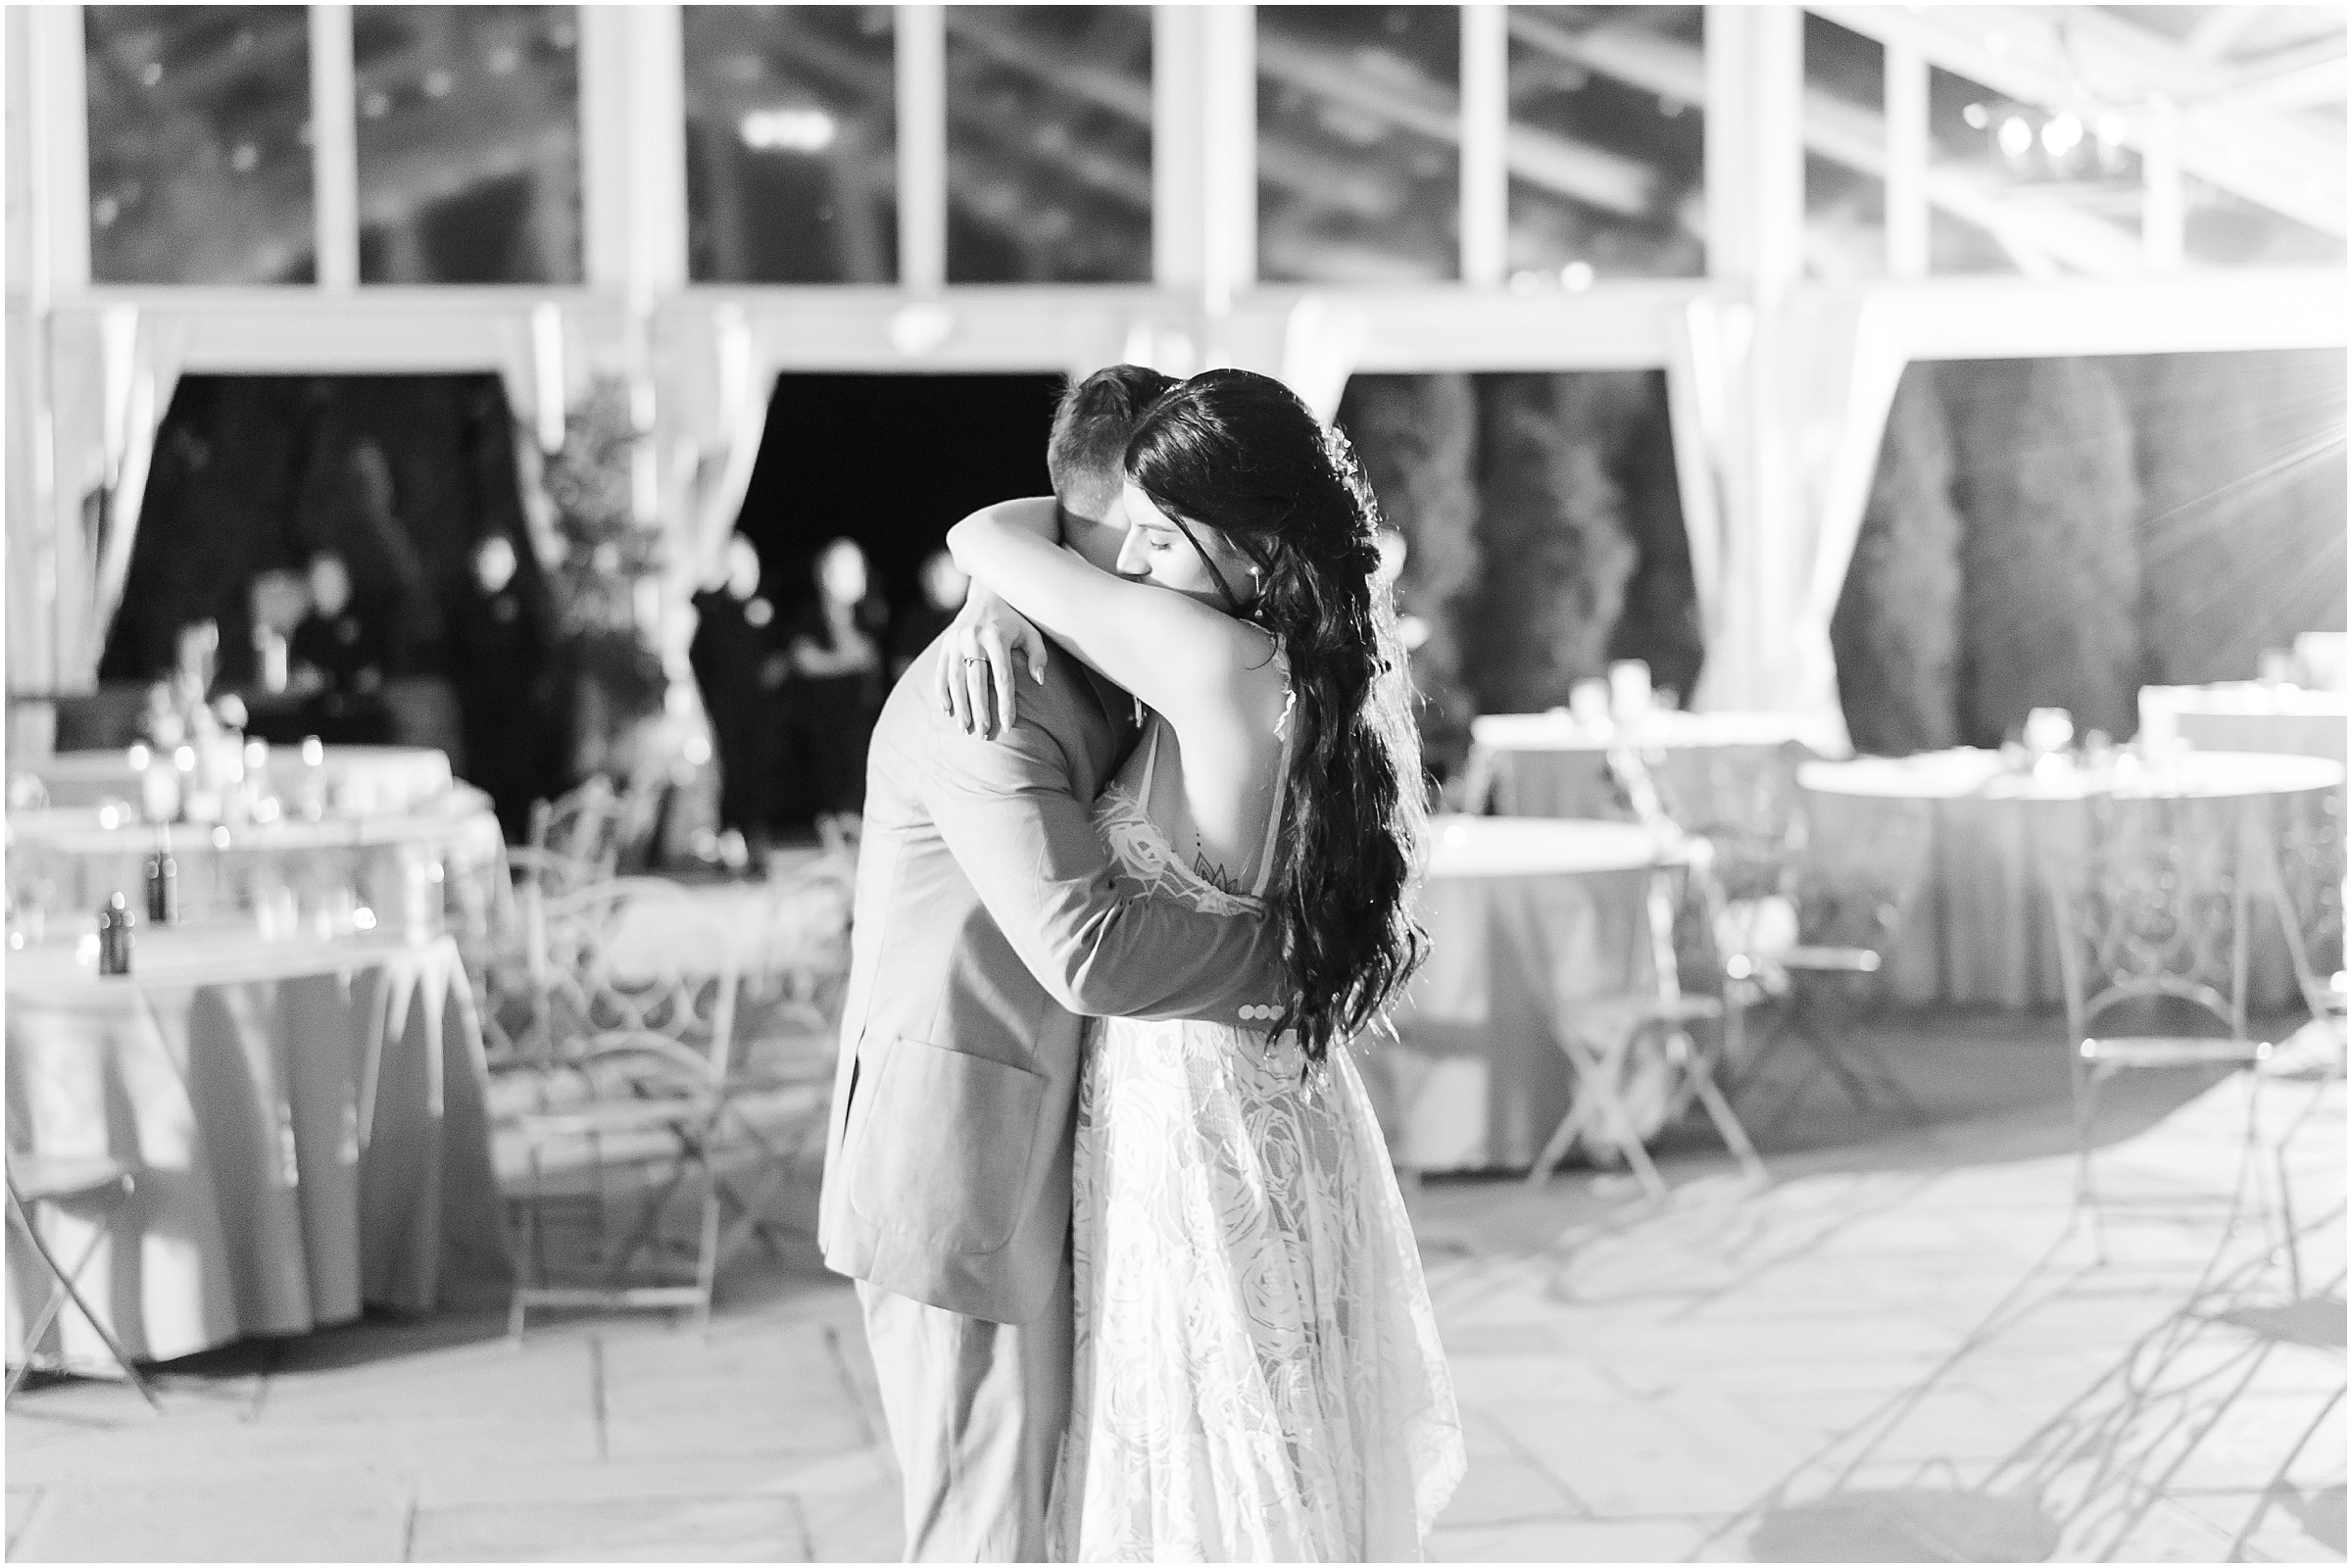 Bride and groom embrace during first dance